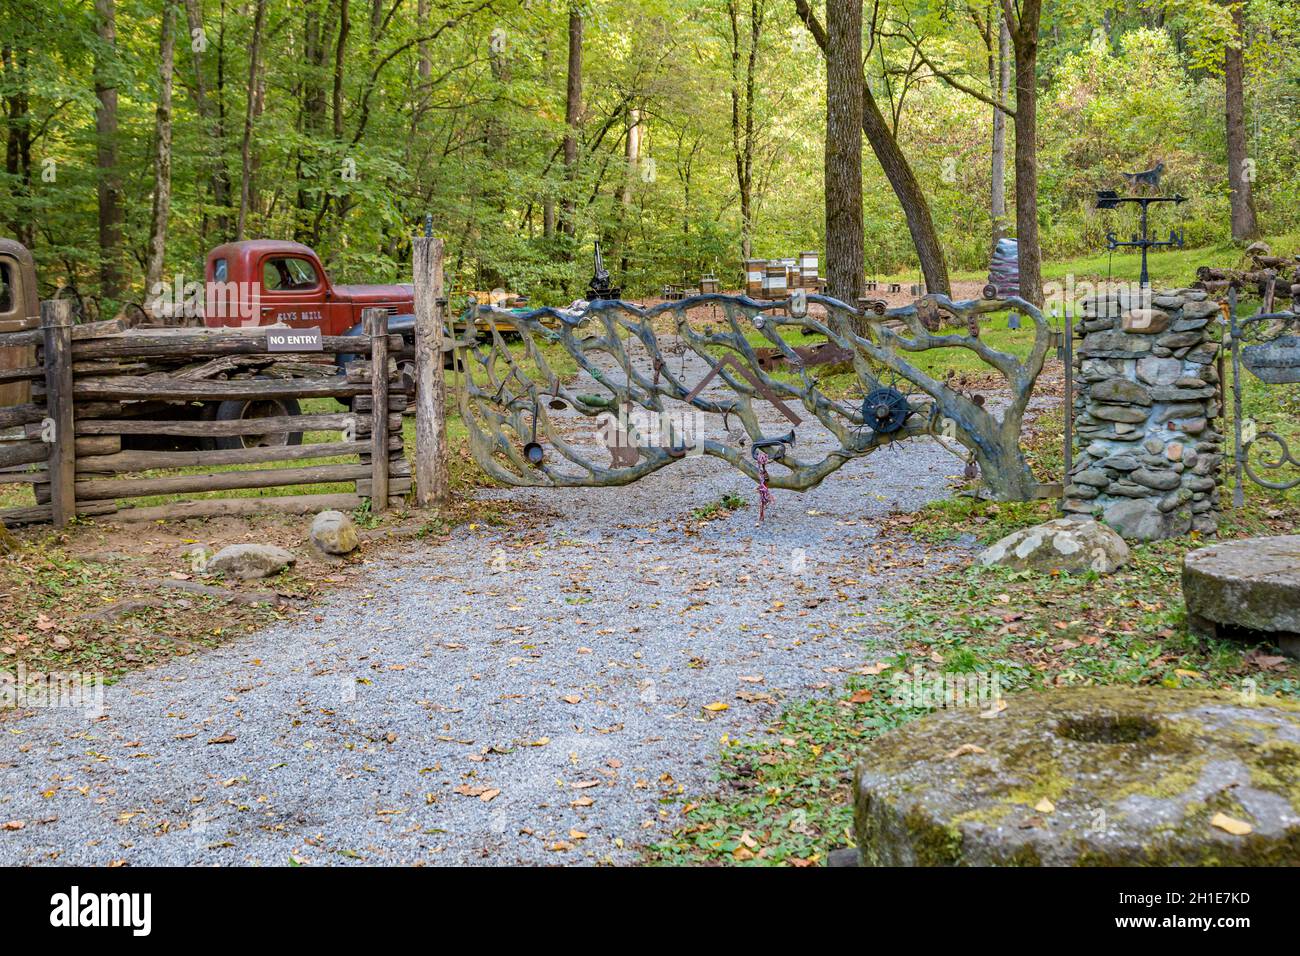 Hand crafted wooden gate looks like tree branches at Ely's Mill along the Roaring Fork Motor Nature Trail outside Gatlinburg Tennessee in the Great Sm Stock Photo